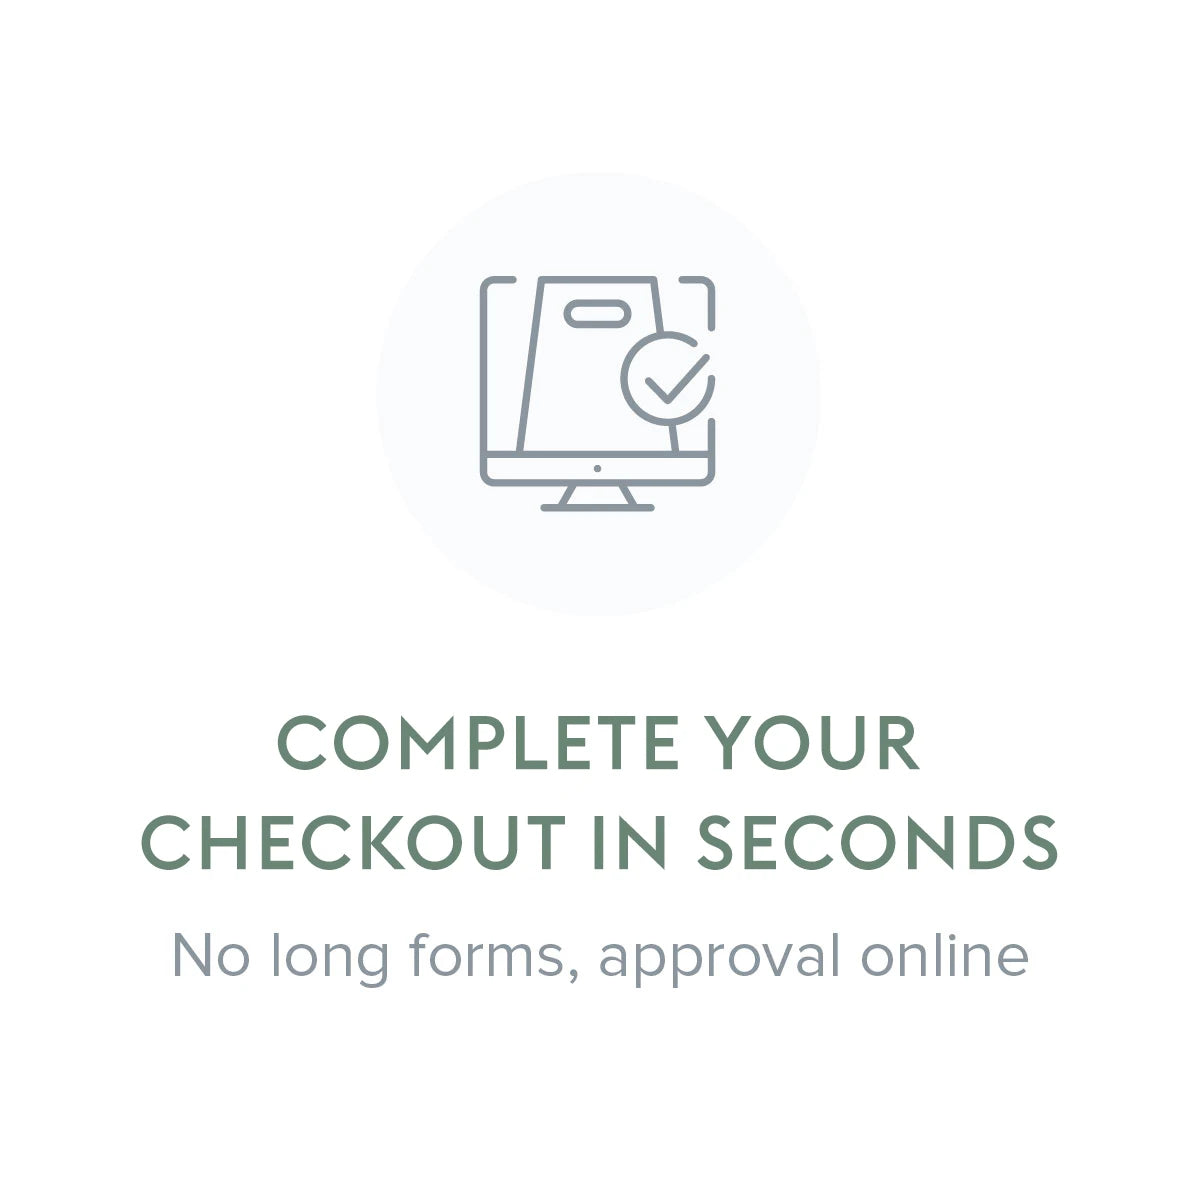 Complete your checkout in seconds